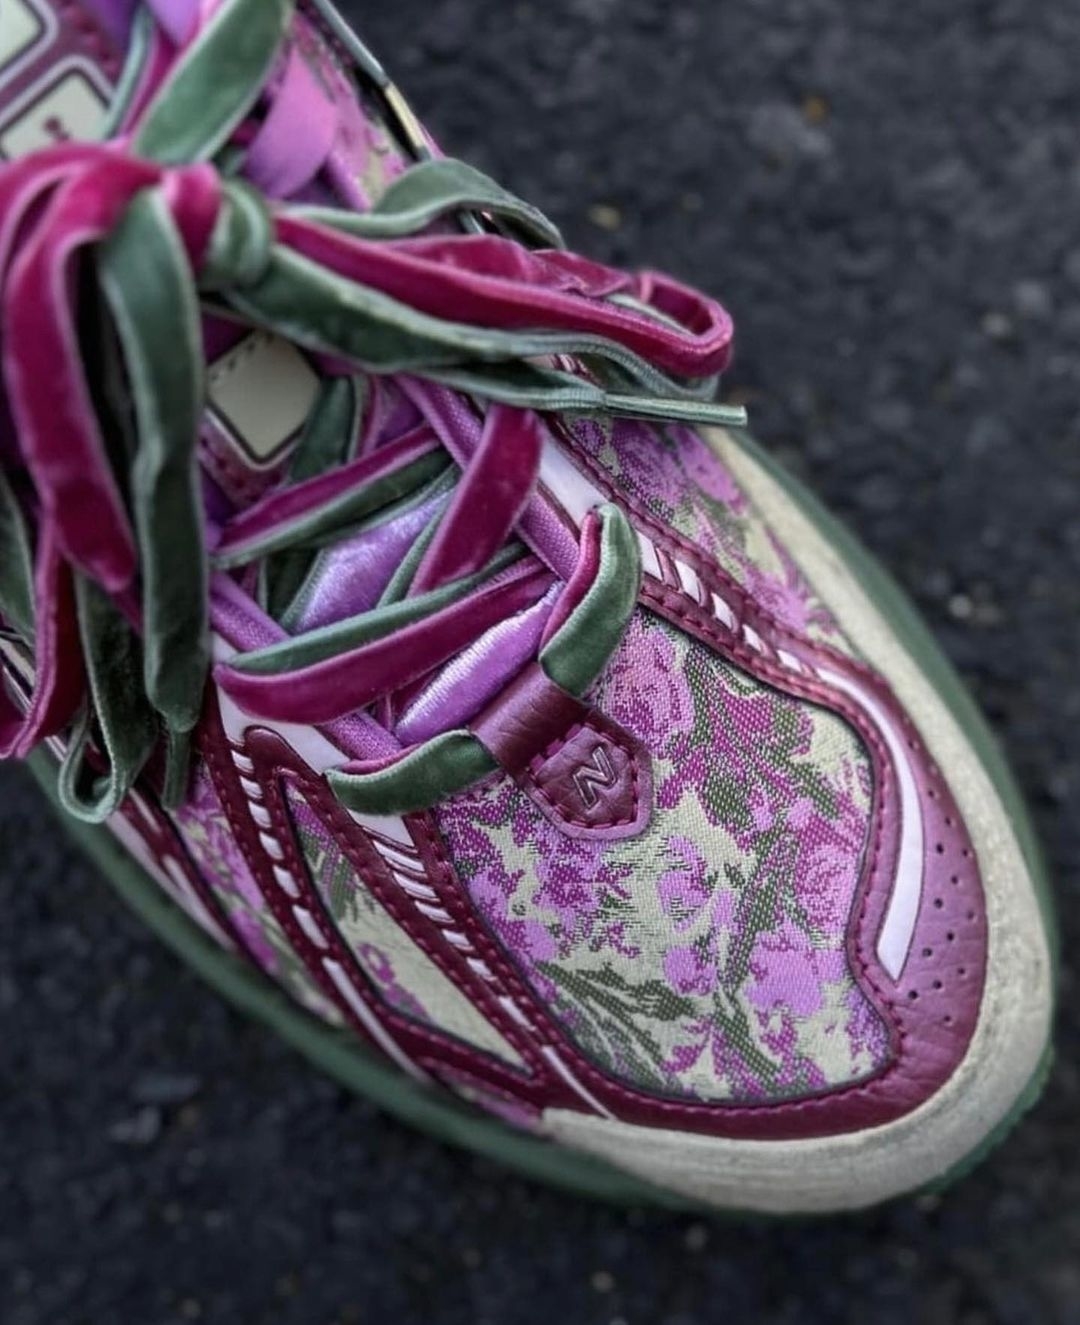 Close-up of a worn sneaker with floral pattern and frayed laces